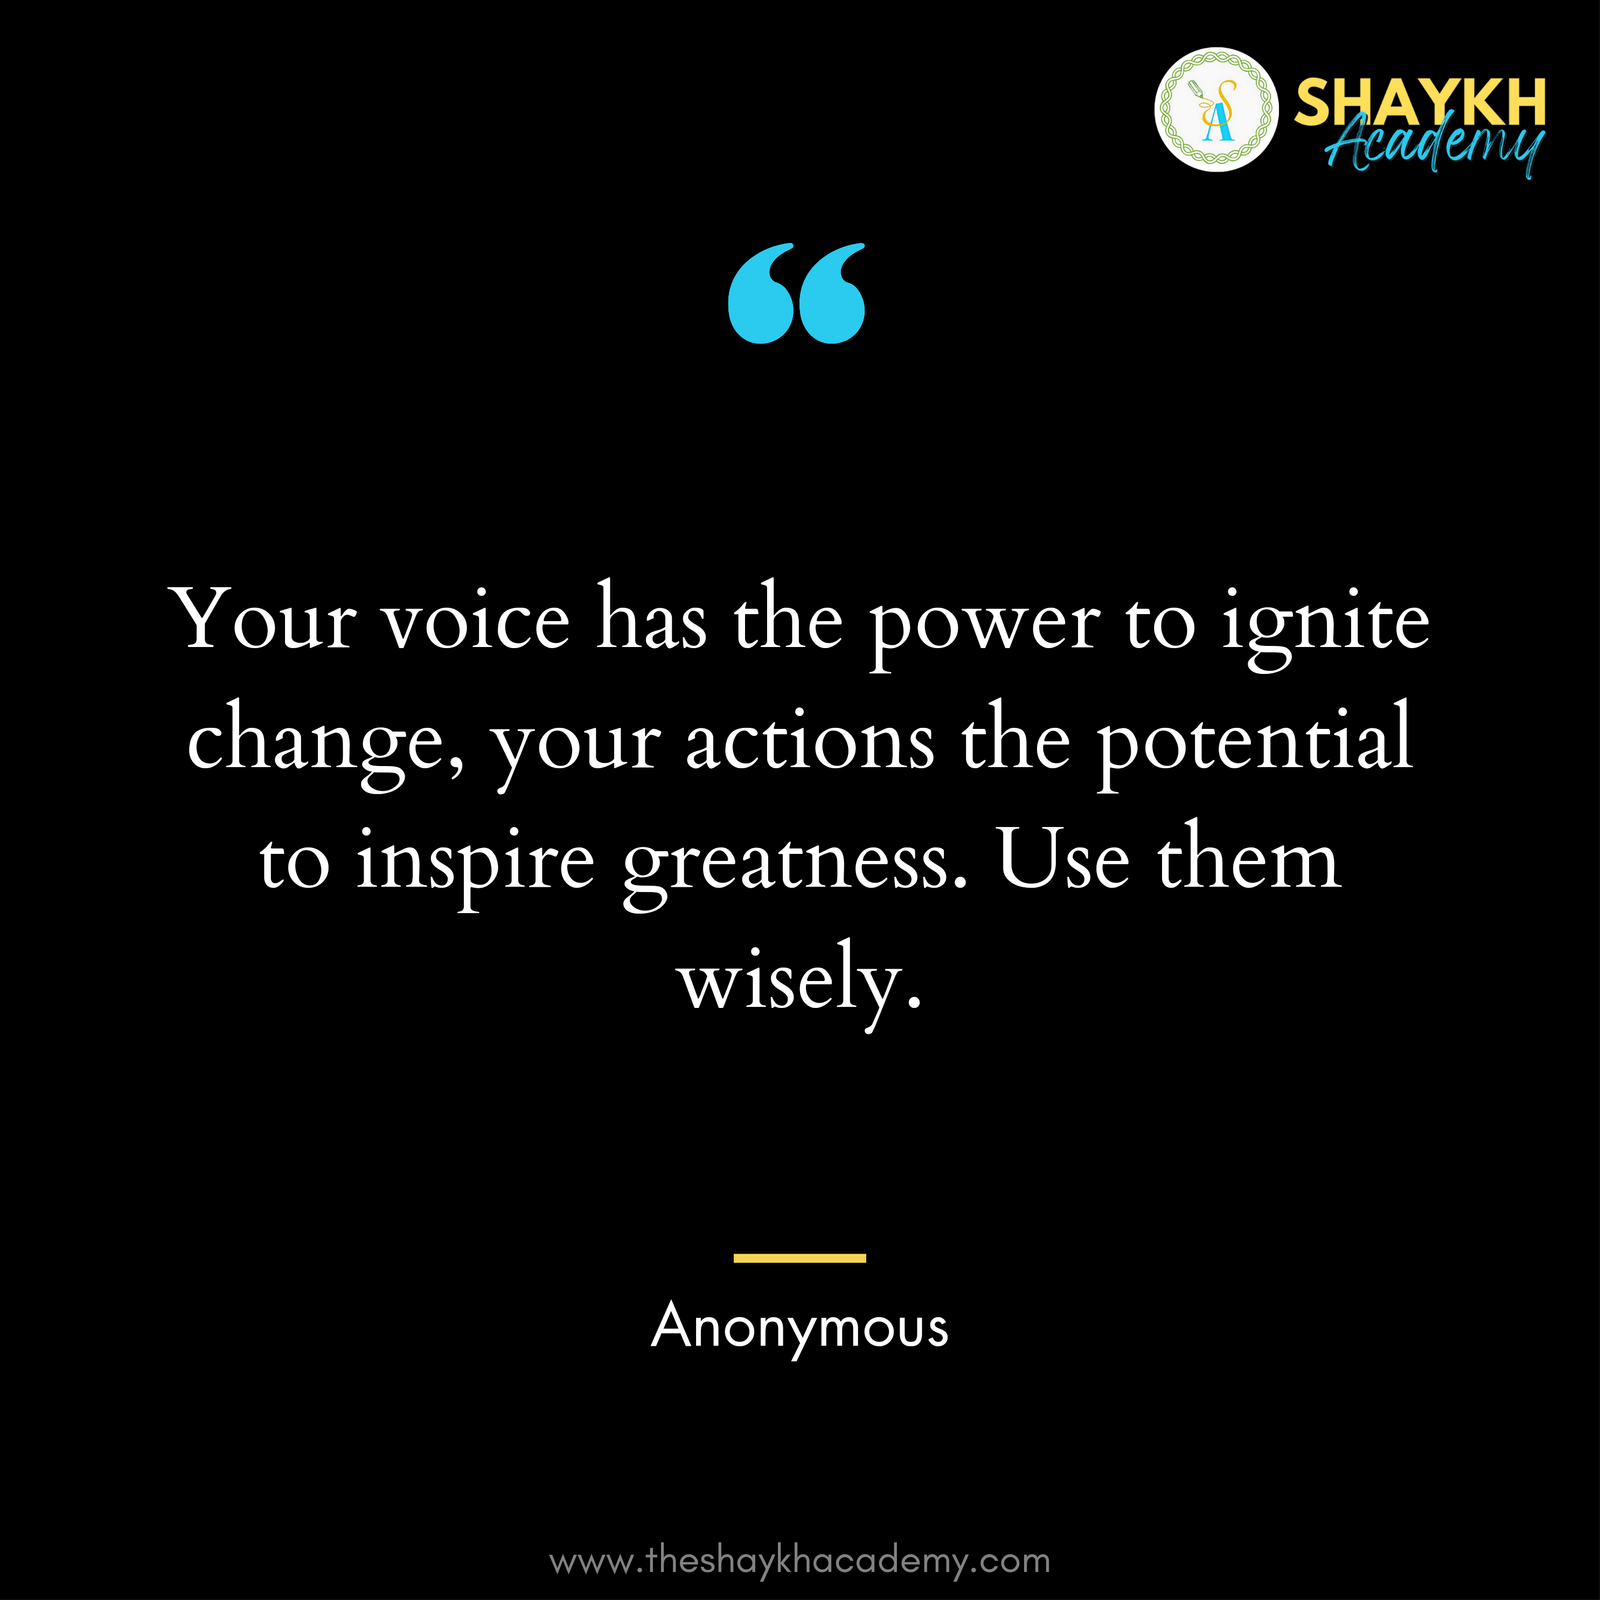 Your voice has the power to ignite change, your actions the potential to inspire greatness. Use them wisely.